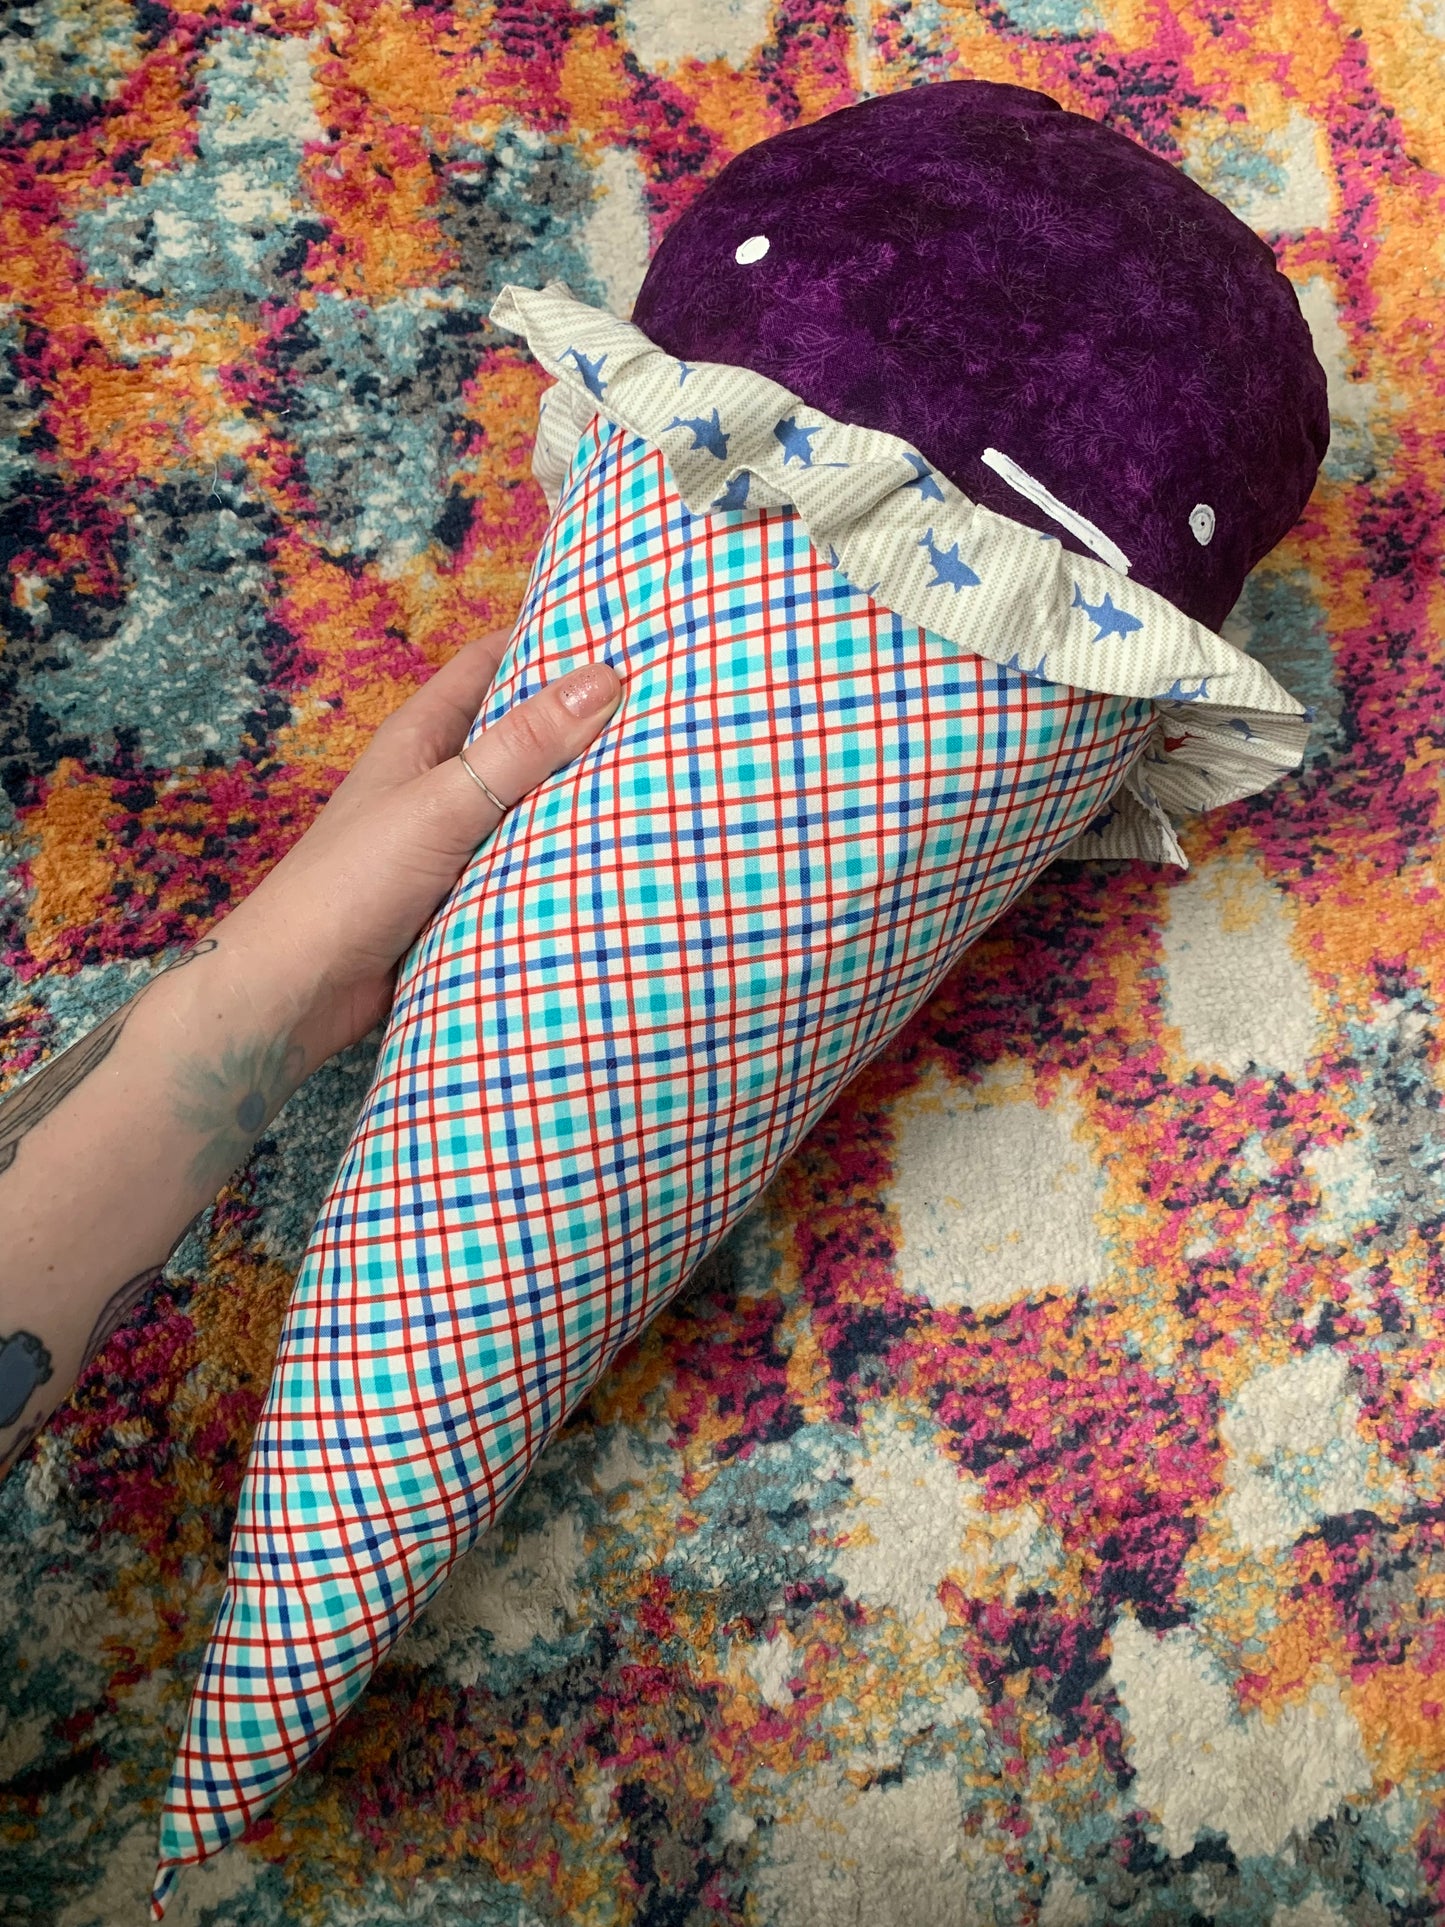 GIANT ice cream cone pillow, with Grape Sharkberry ice cream top, an indifferent white face, and a red and blue plaid cone. held by a hand for scale